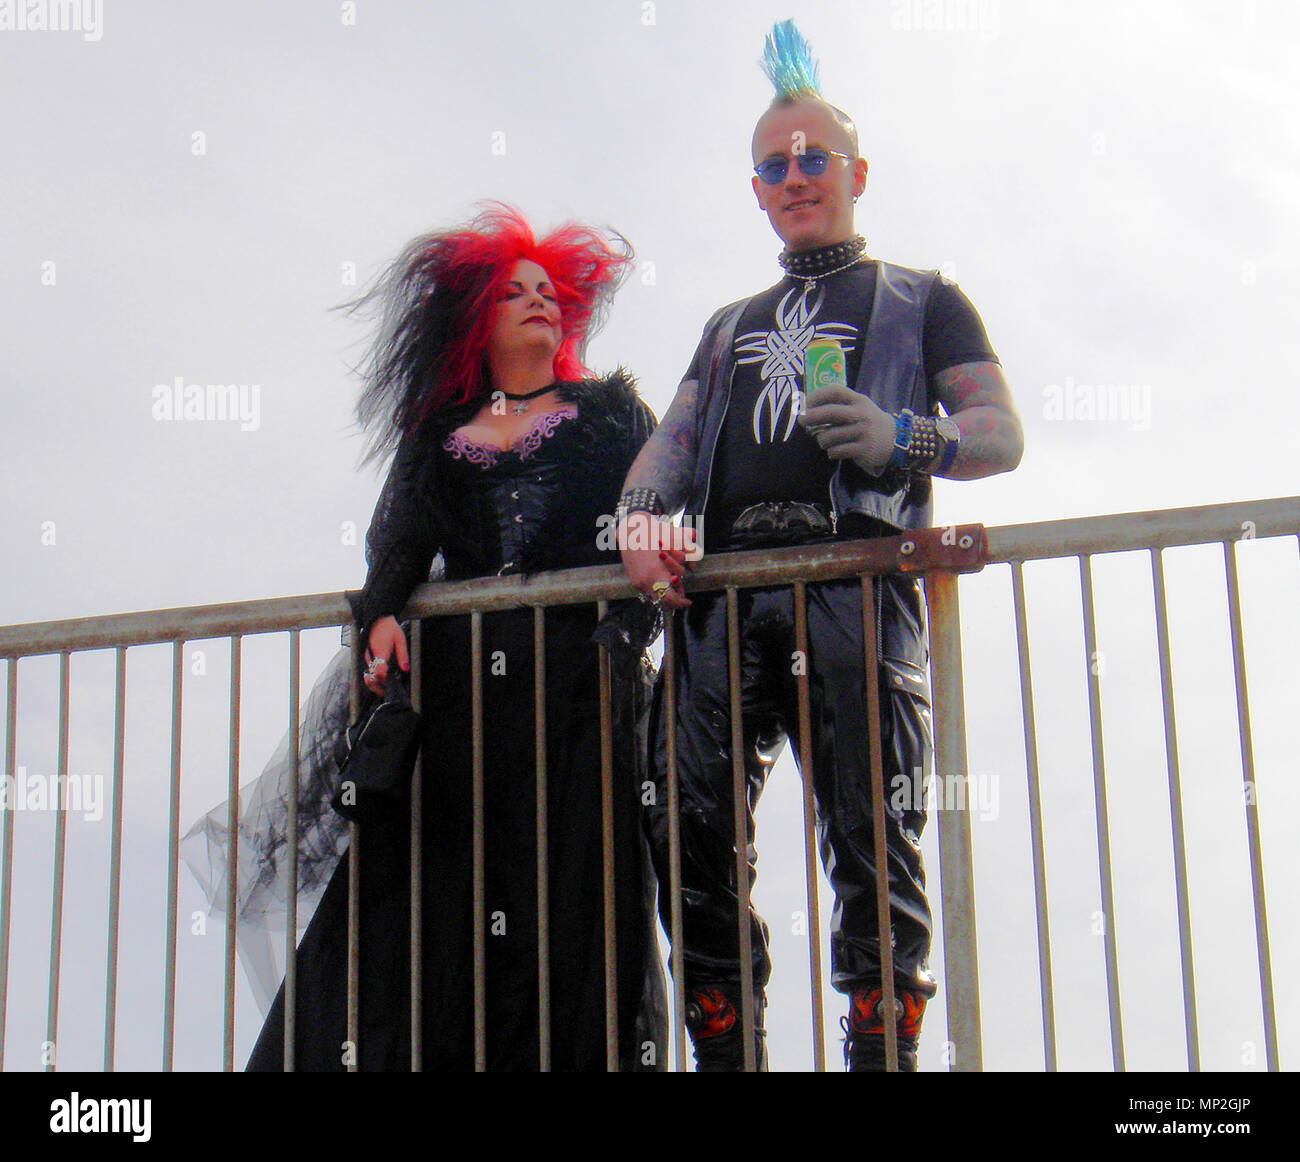 PUNK GOTHIC -contrasting costumes at   the annual Goth festival at Whitby, Yorkshire, UK Stock Photo